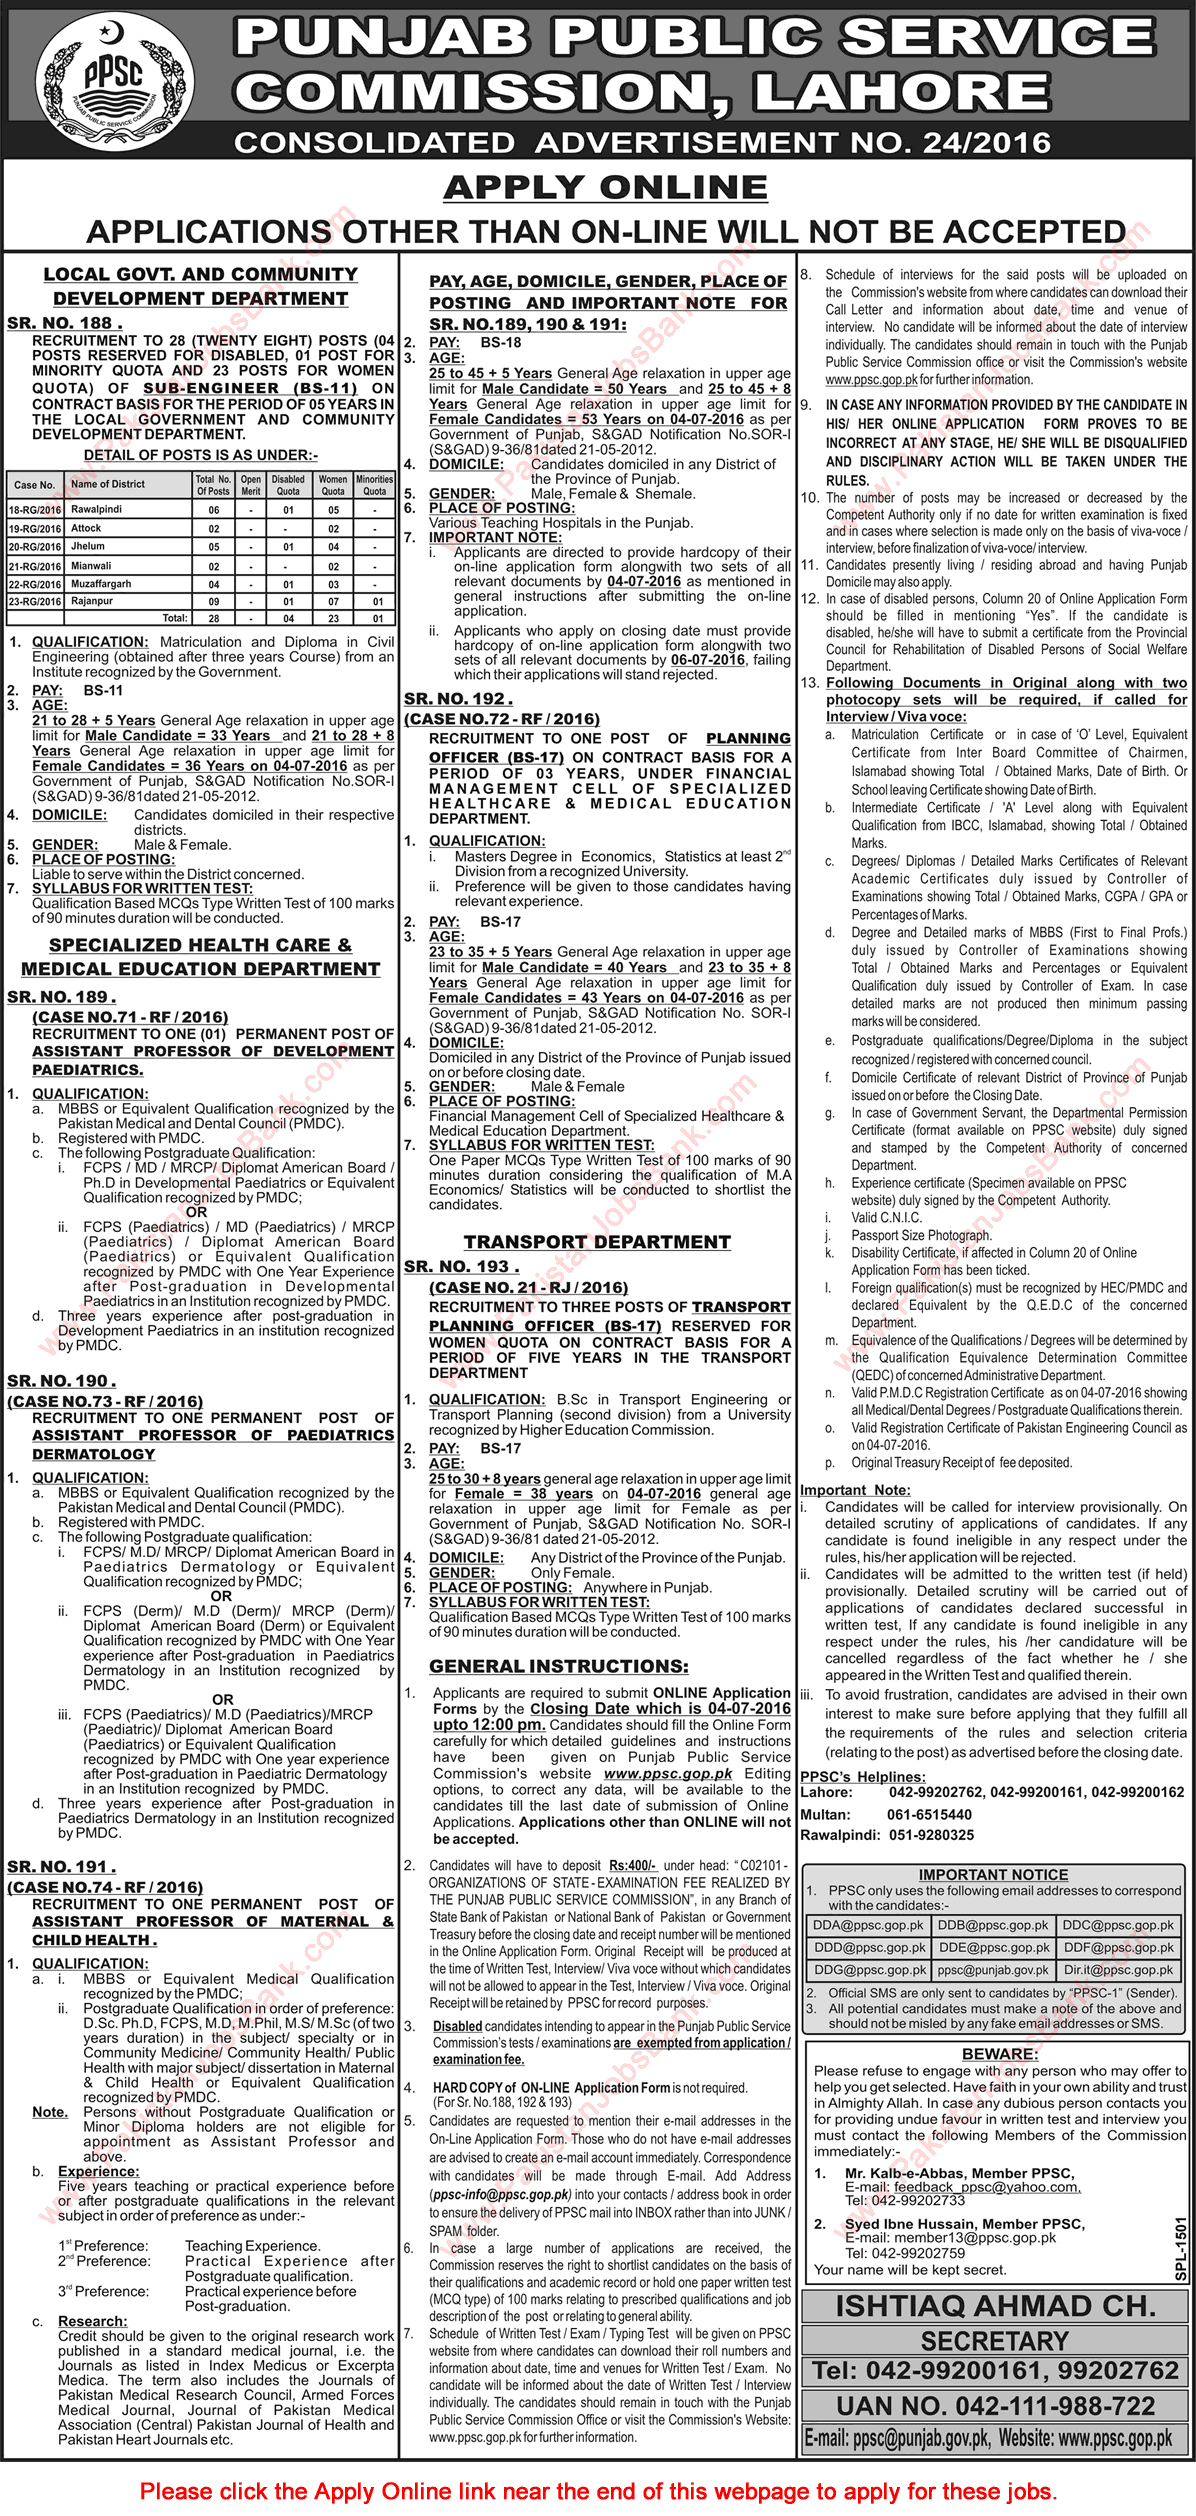 PPSC Jobs June 2016 Consolidated Advertisement No 24/2016 Apply Online Latest